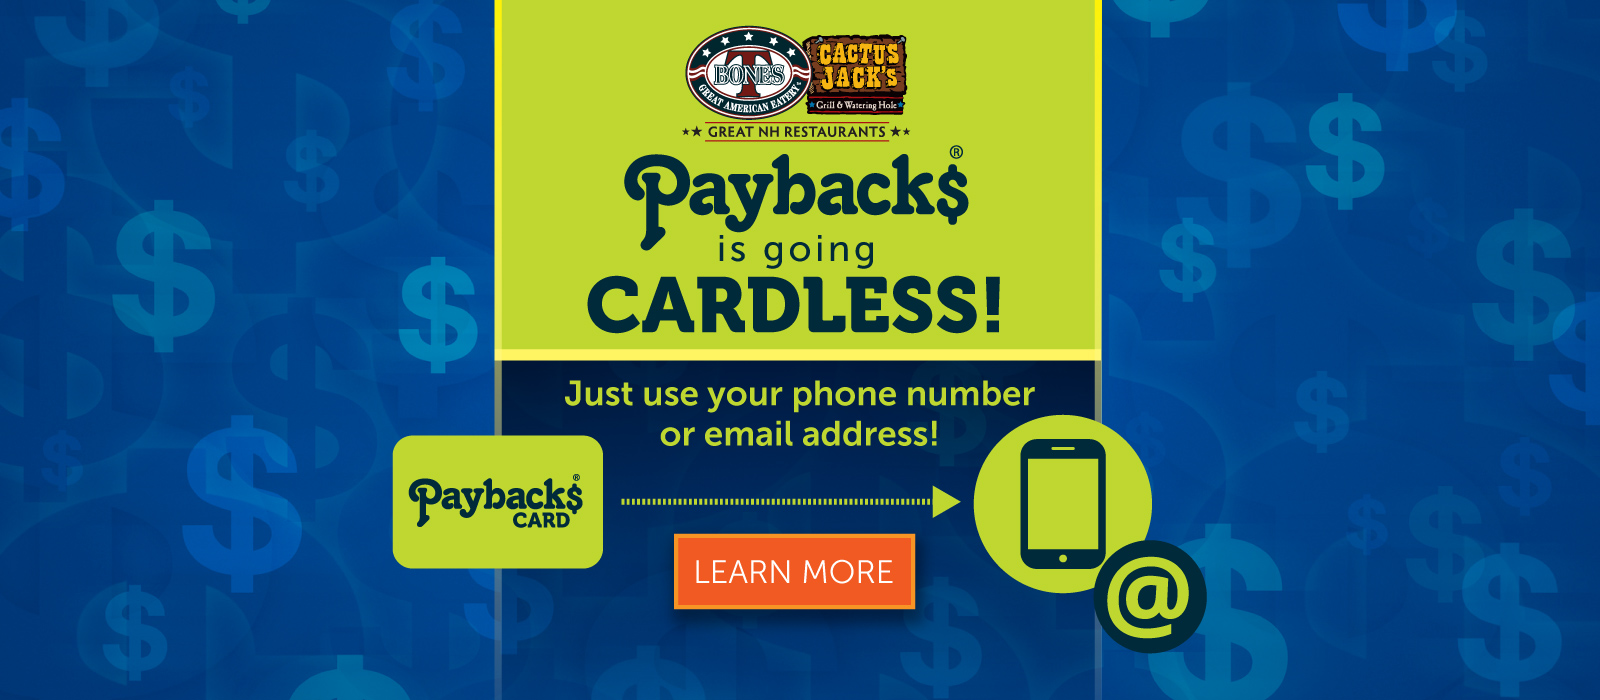 Payback$ is Going Cardless!